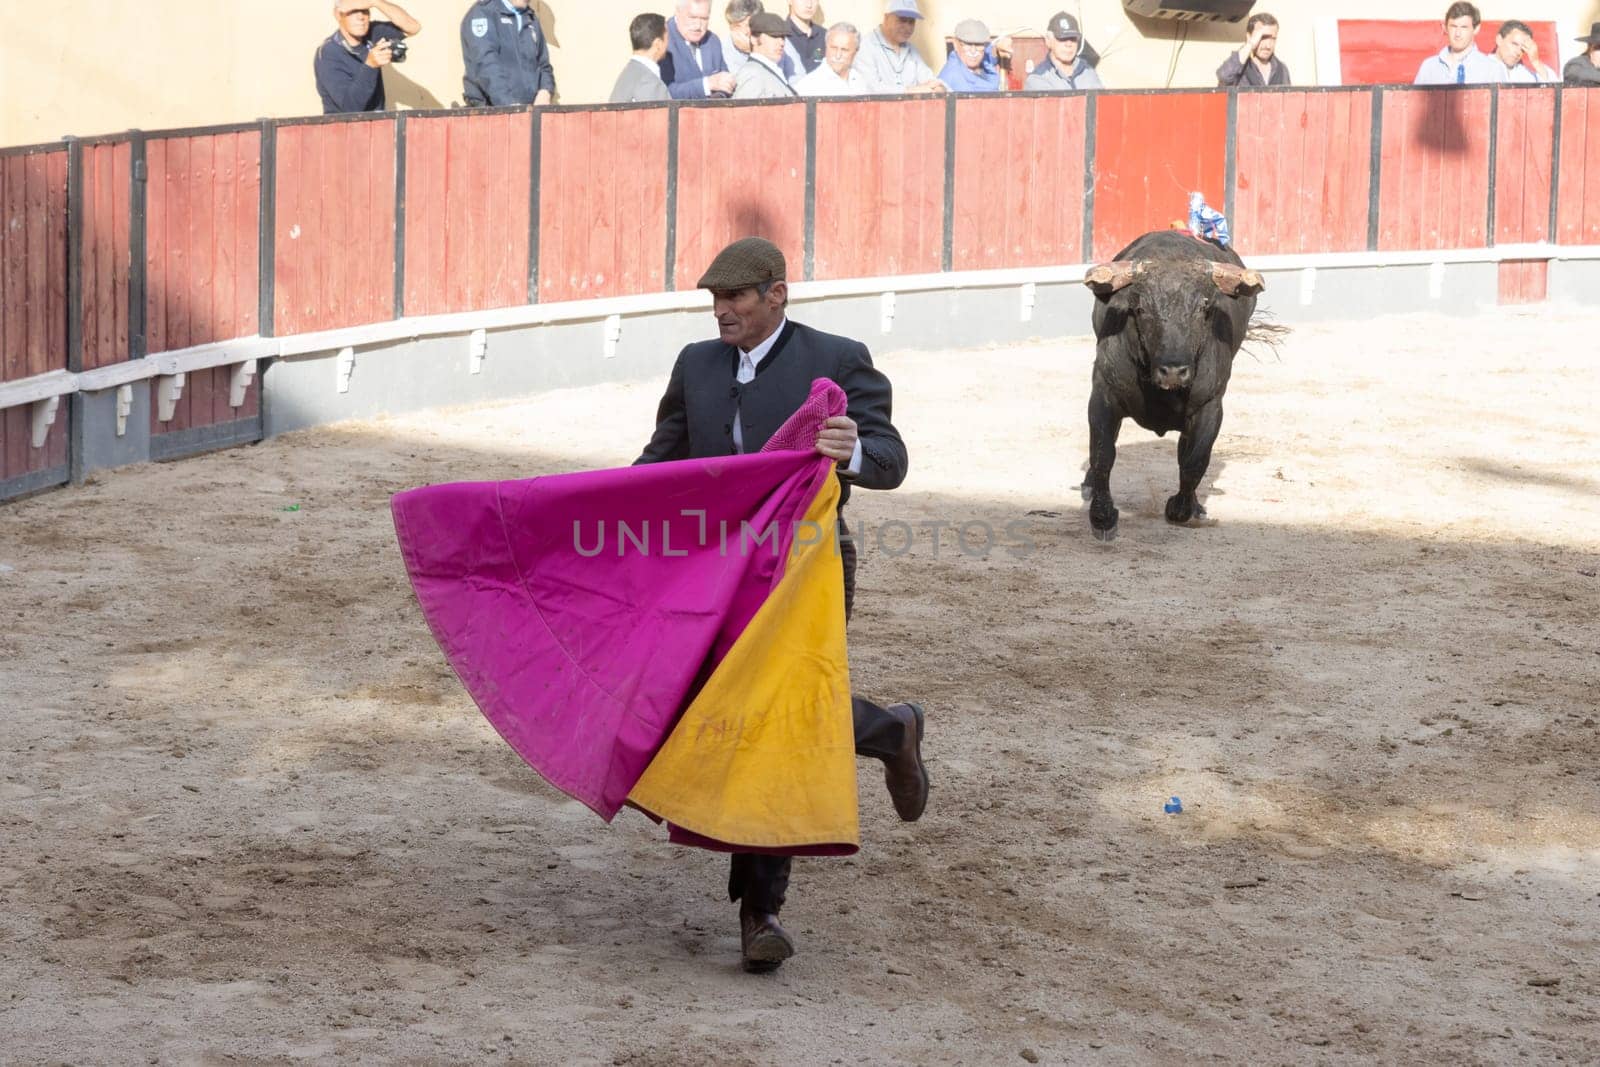 March 26, 2023 Lisbon, Portugal: Tourada - bullfighter run away from the bull holding a bright rag by Studia72